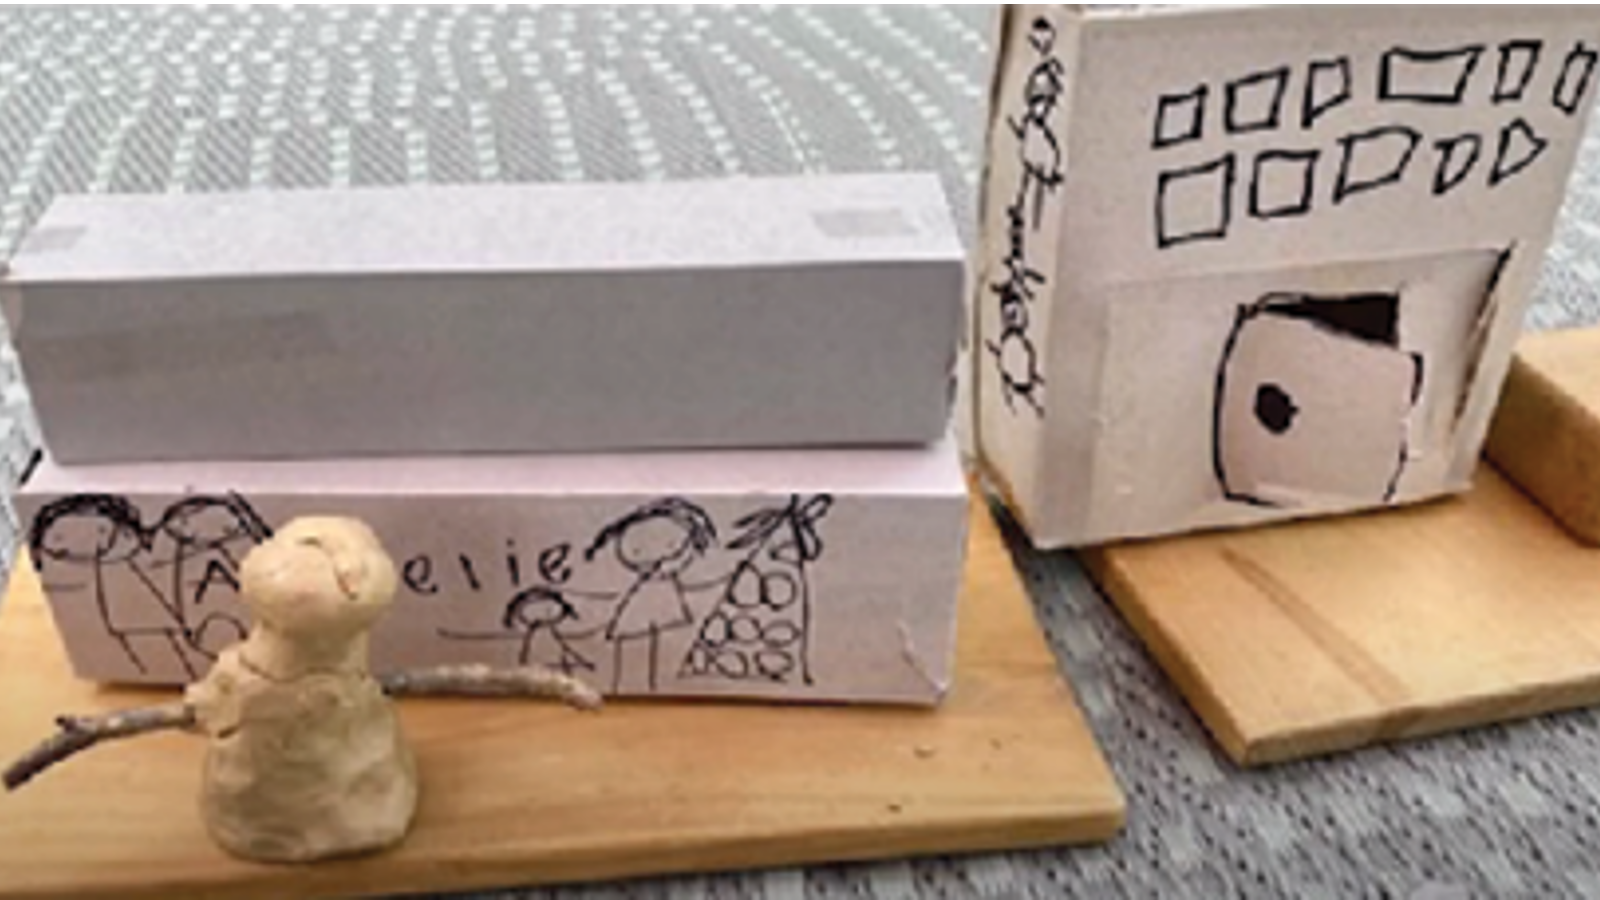 Child's artwork of cardboard boxes and clay figures.